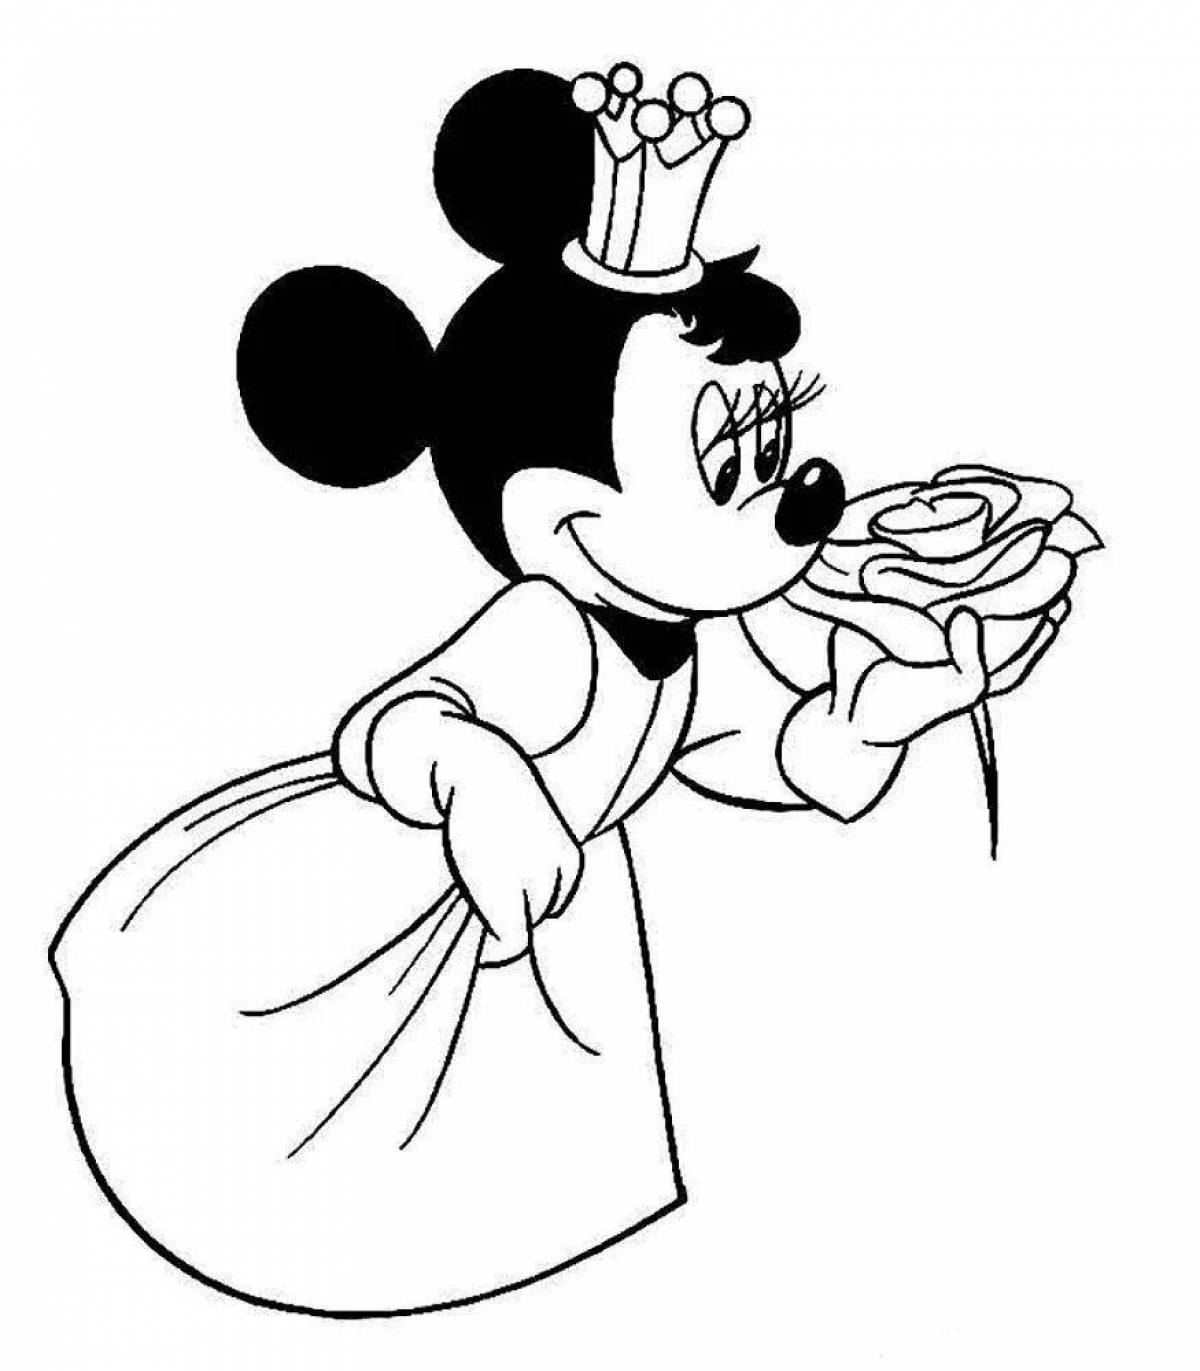 Cute minnie mouse coloring page